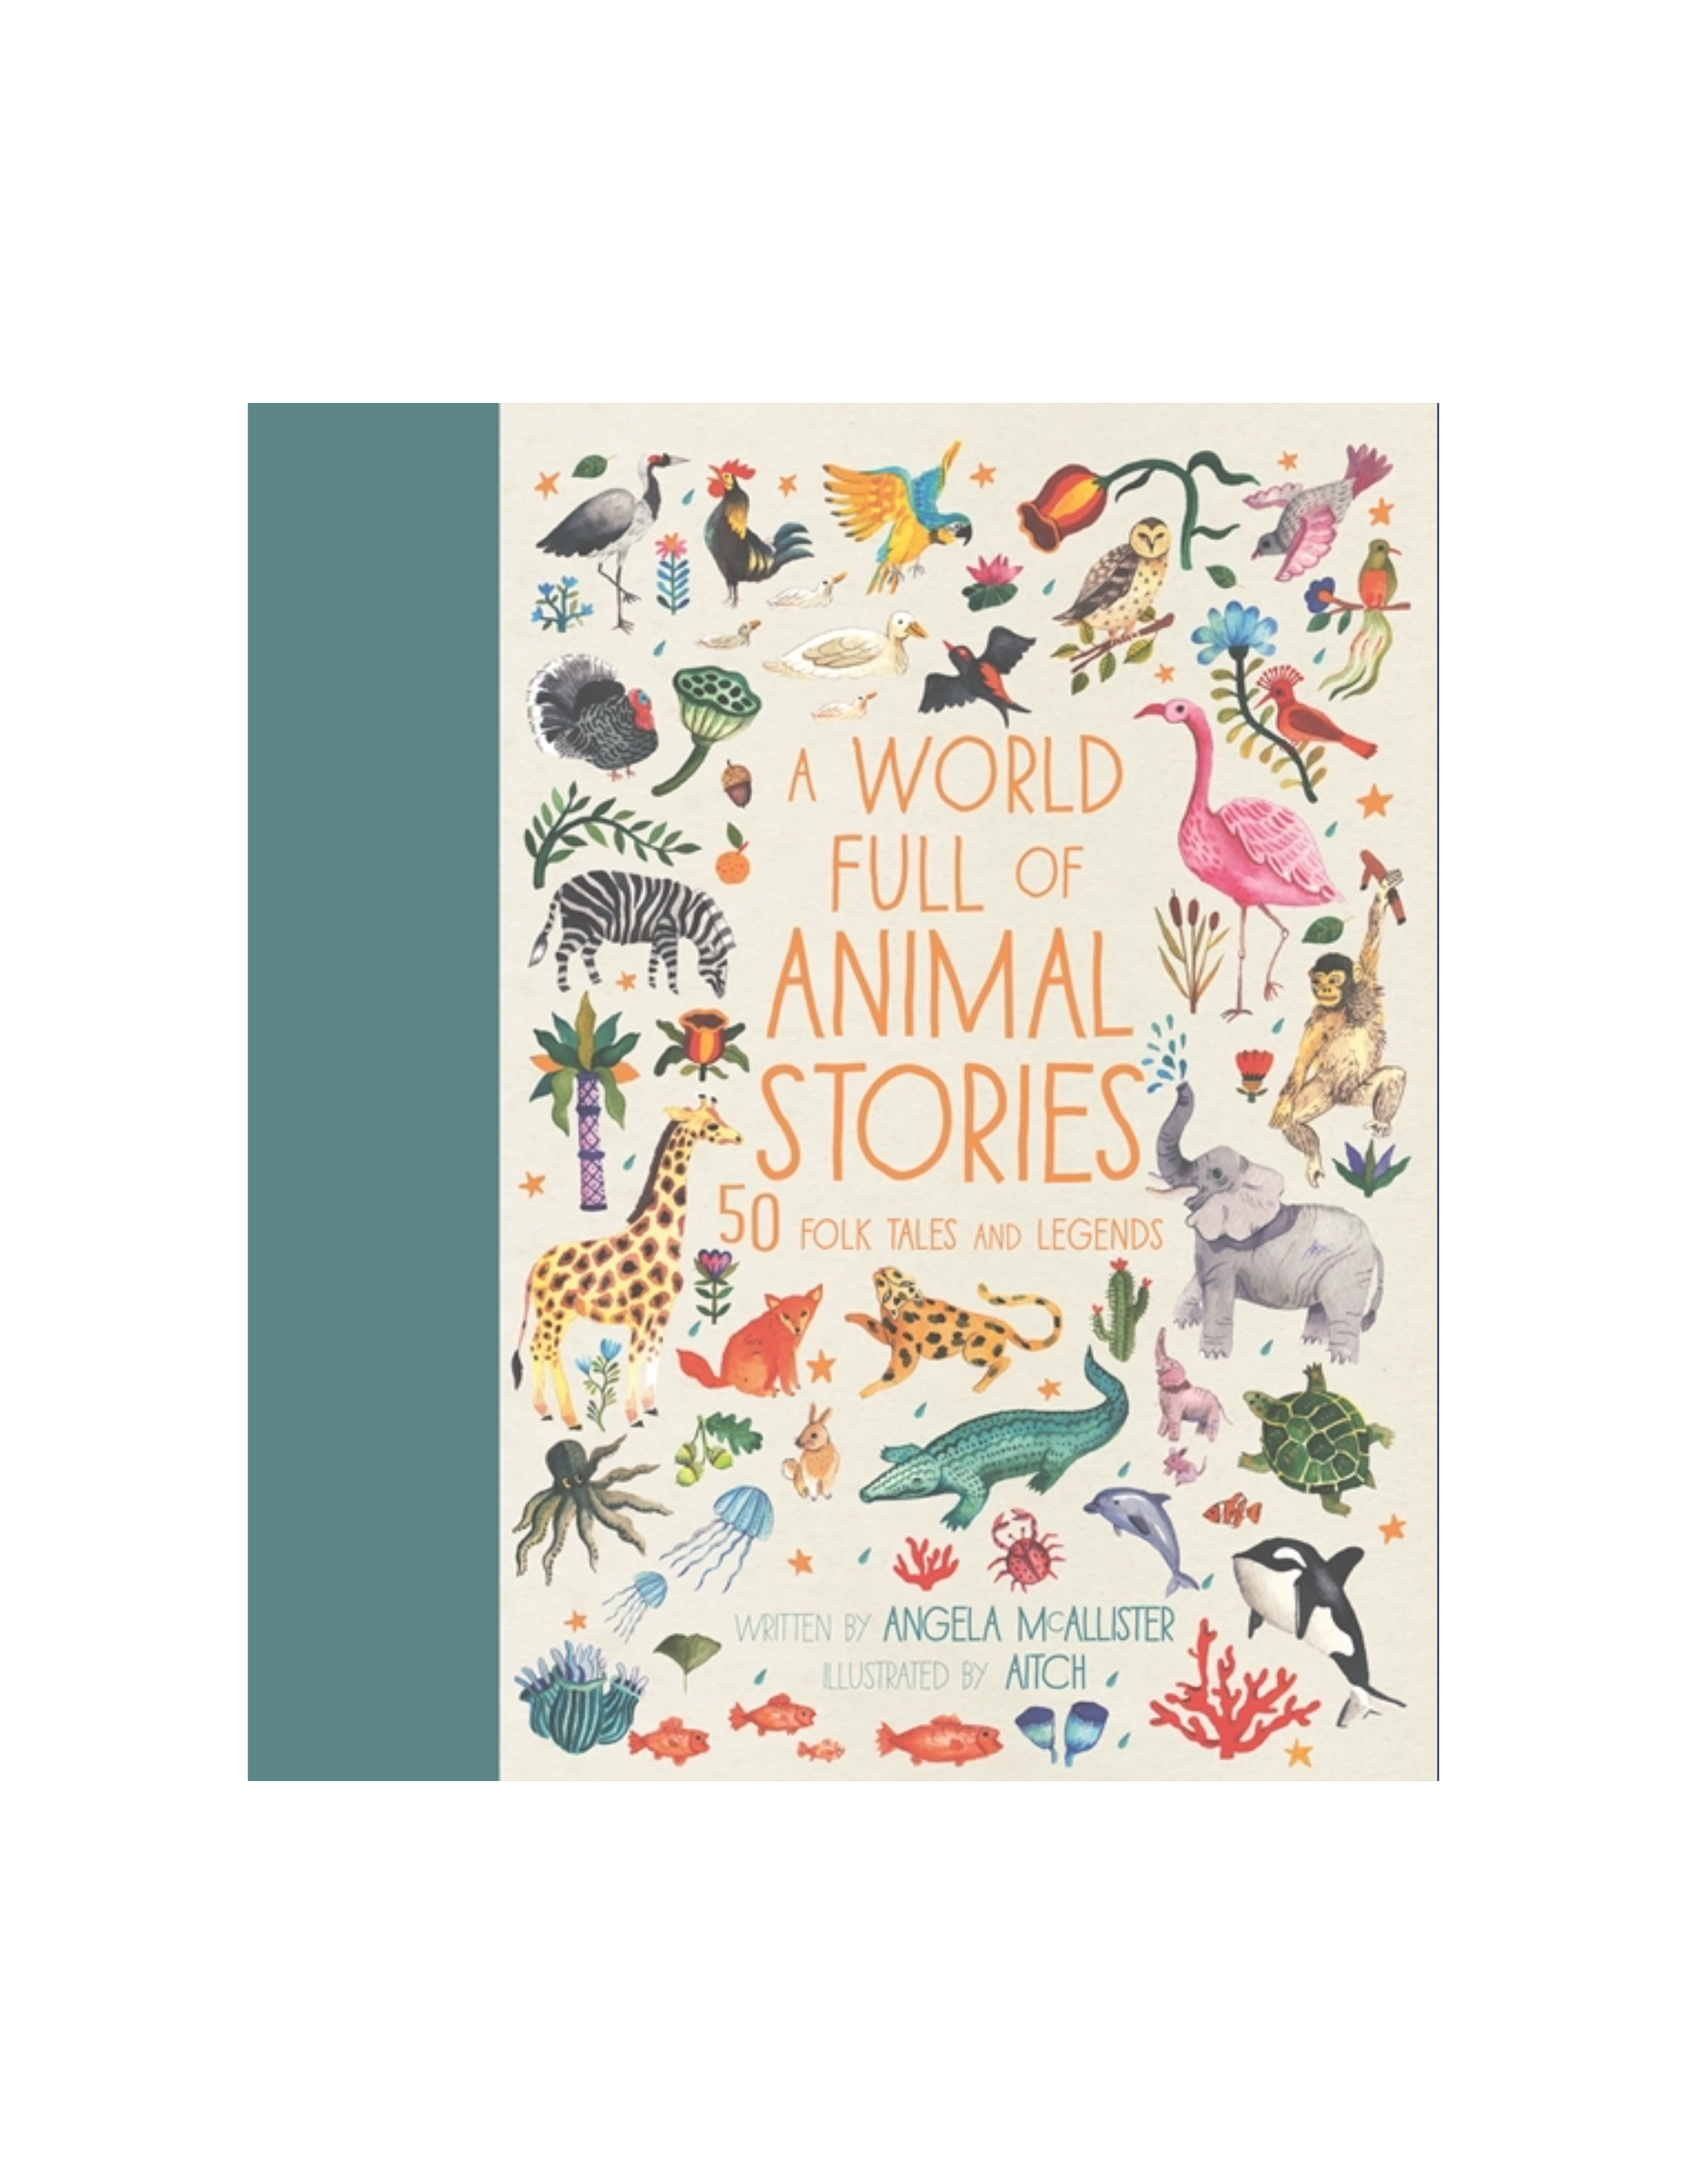 A World Full of Animal Stories: 50 Folktales and Legends from Around the World